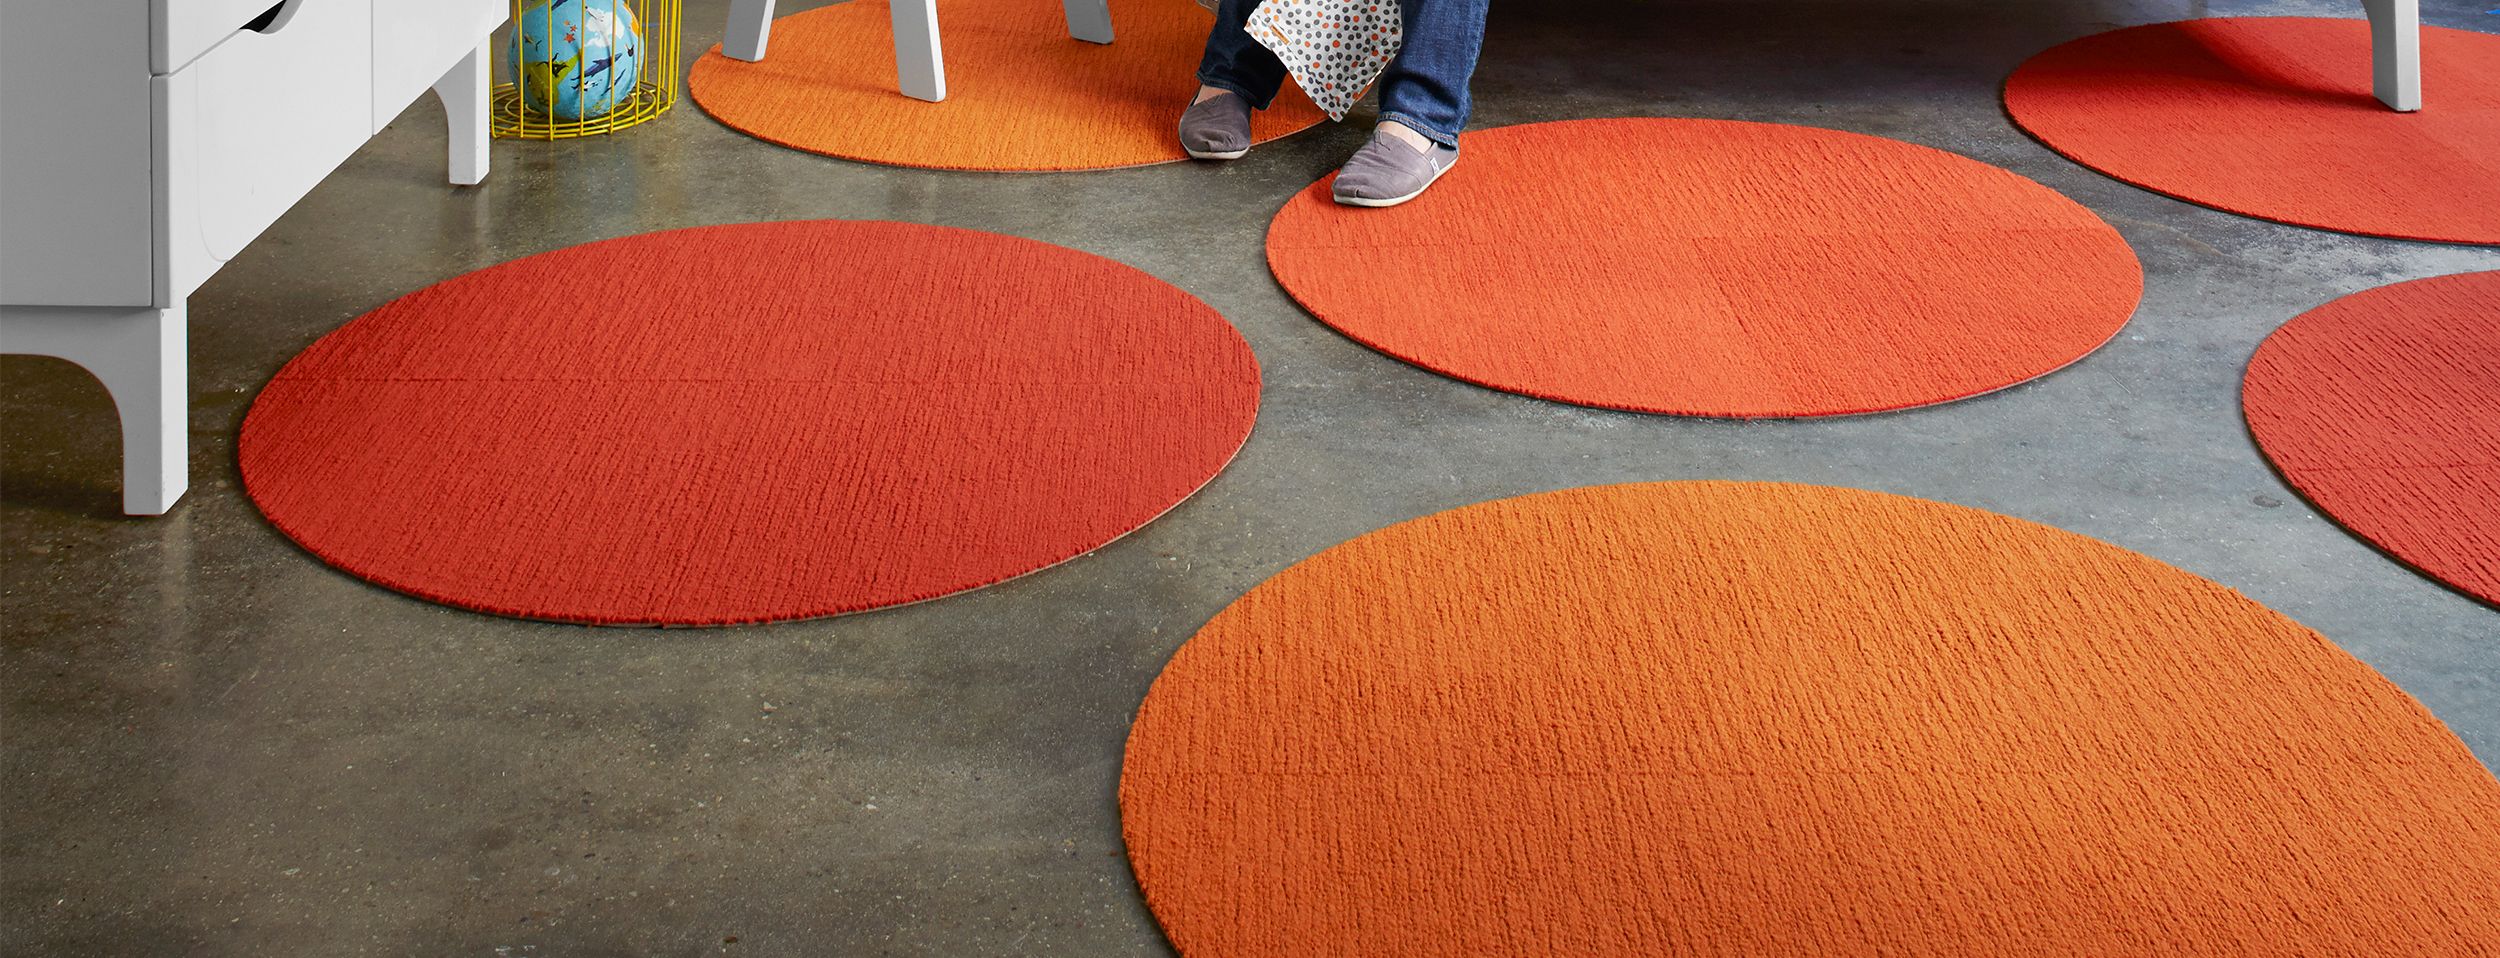 Made You Look Round Rug – Orange –  (View 3 of 15)